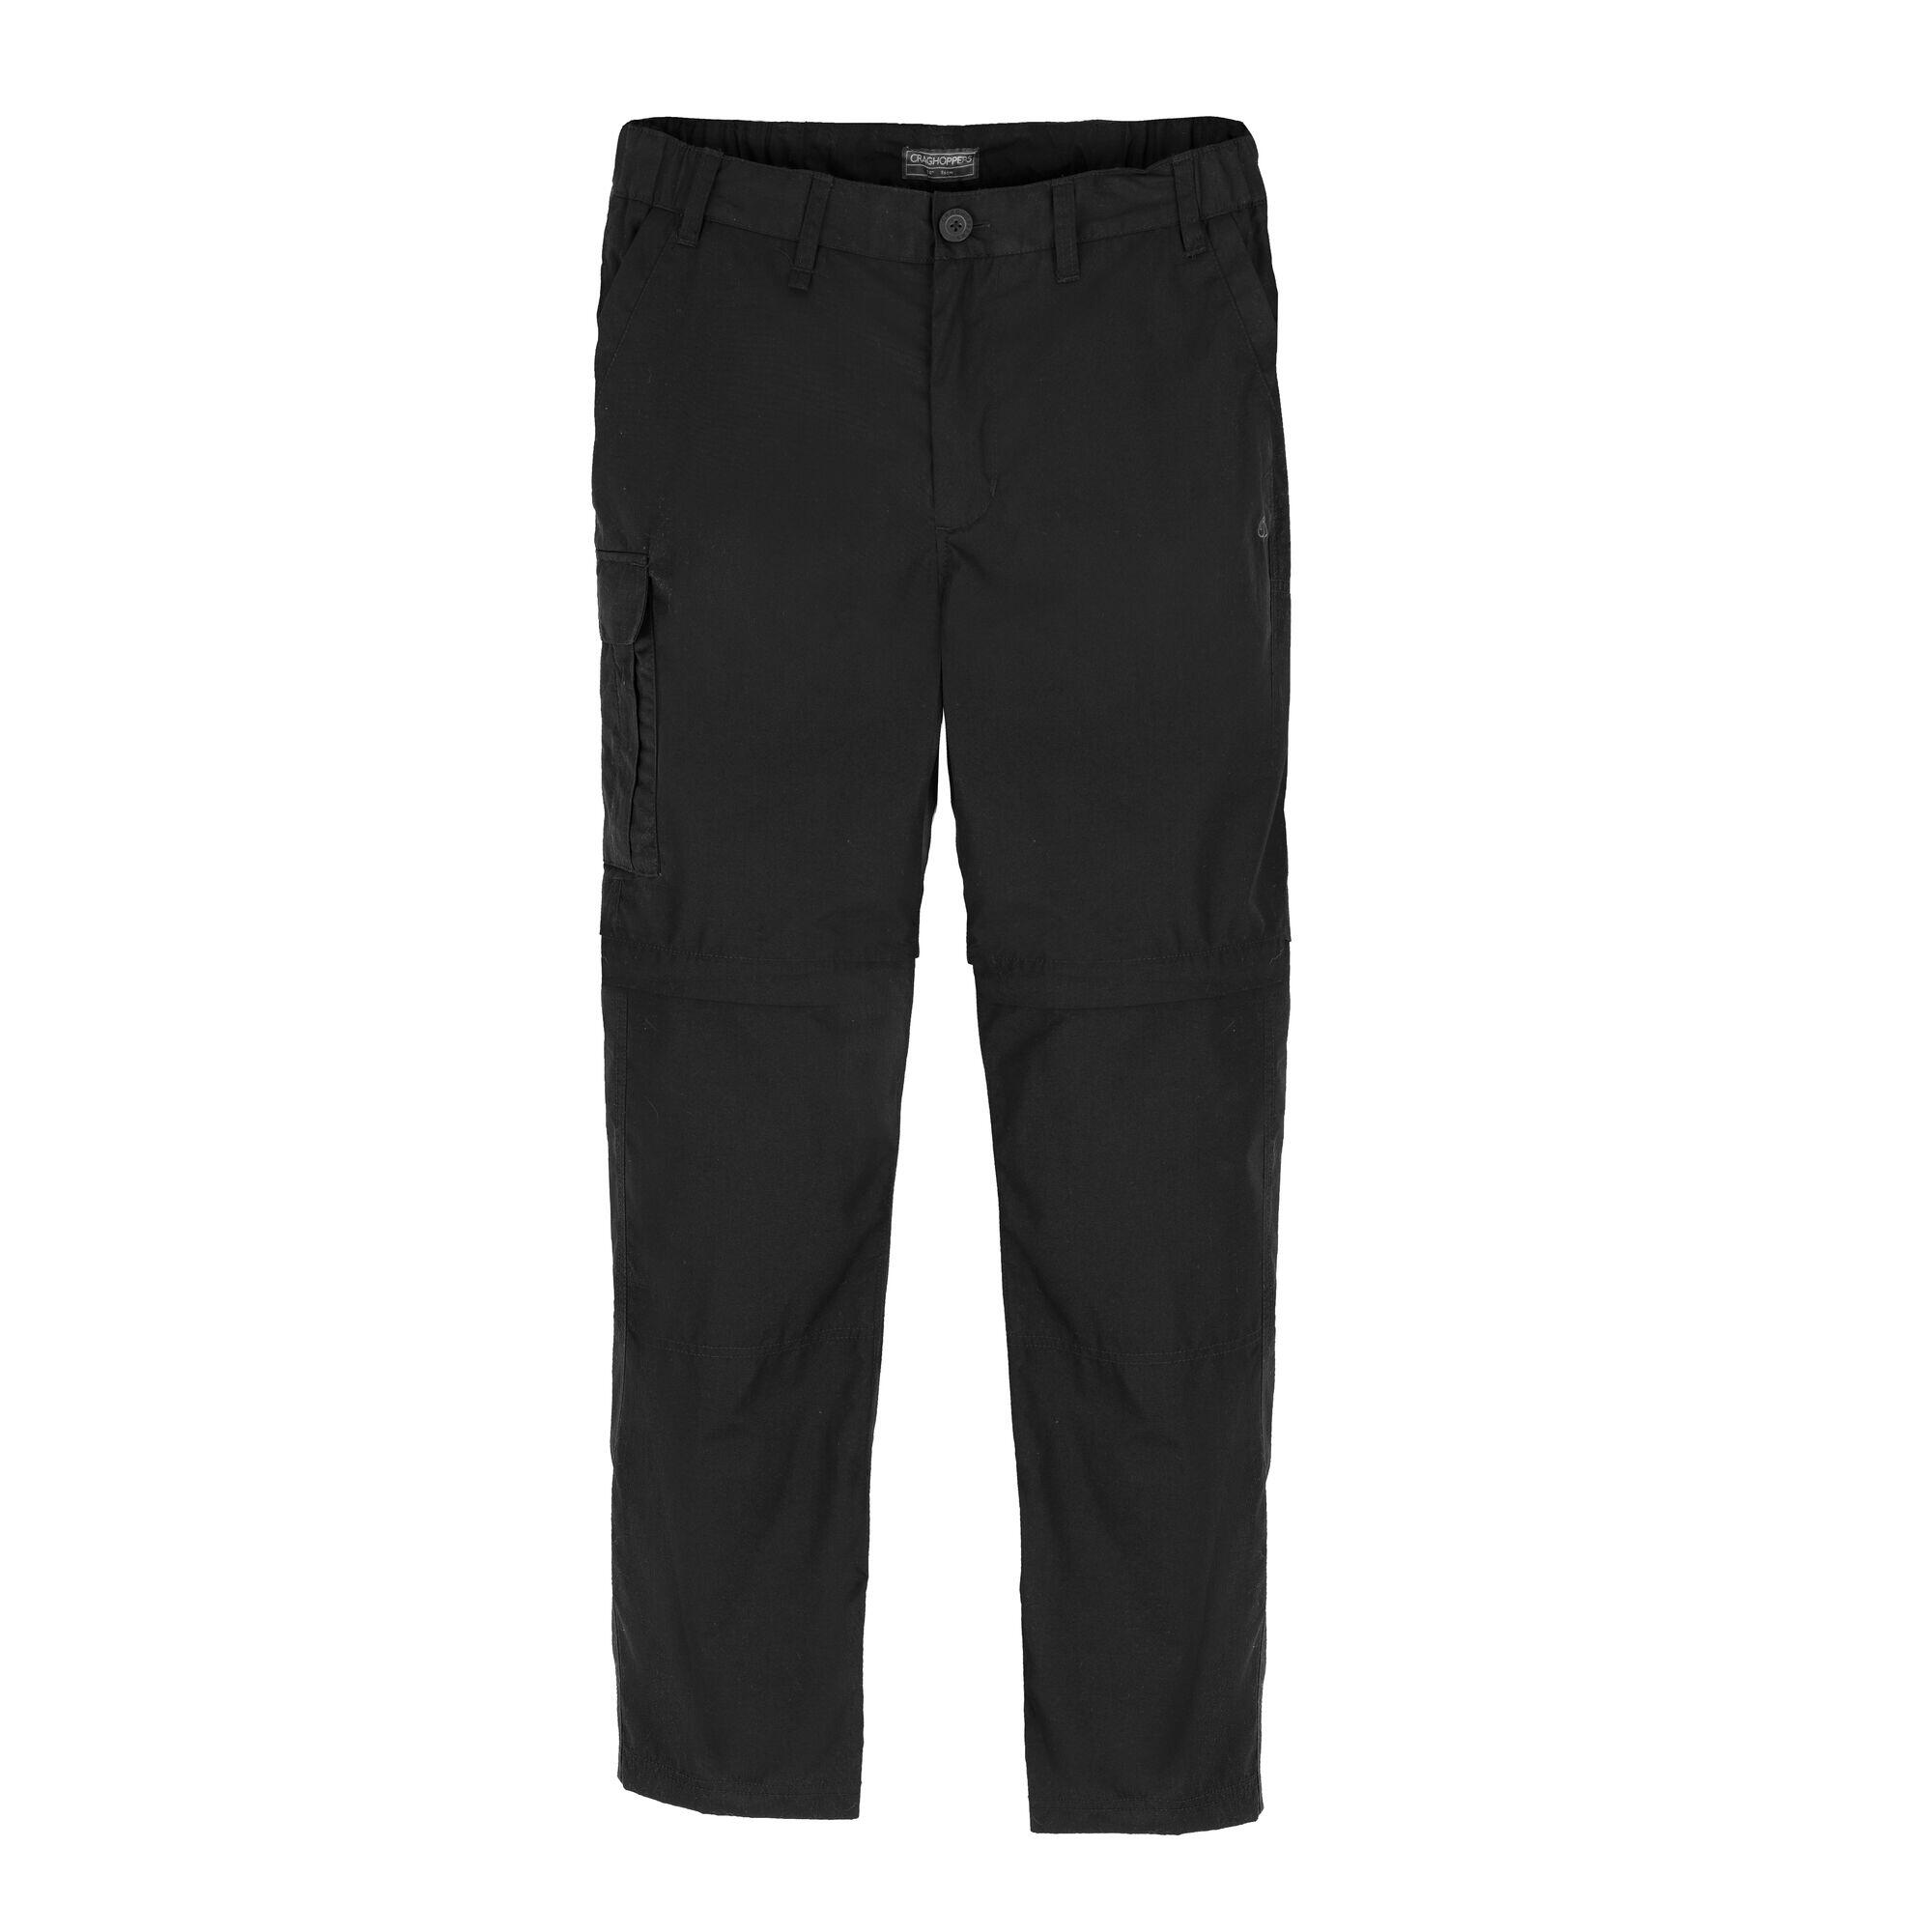 CRAGHOPPERS Men's Expert Kiwi Tailored Convertible Trousers